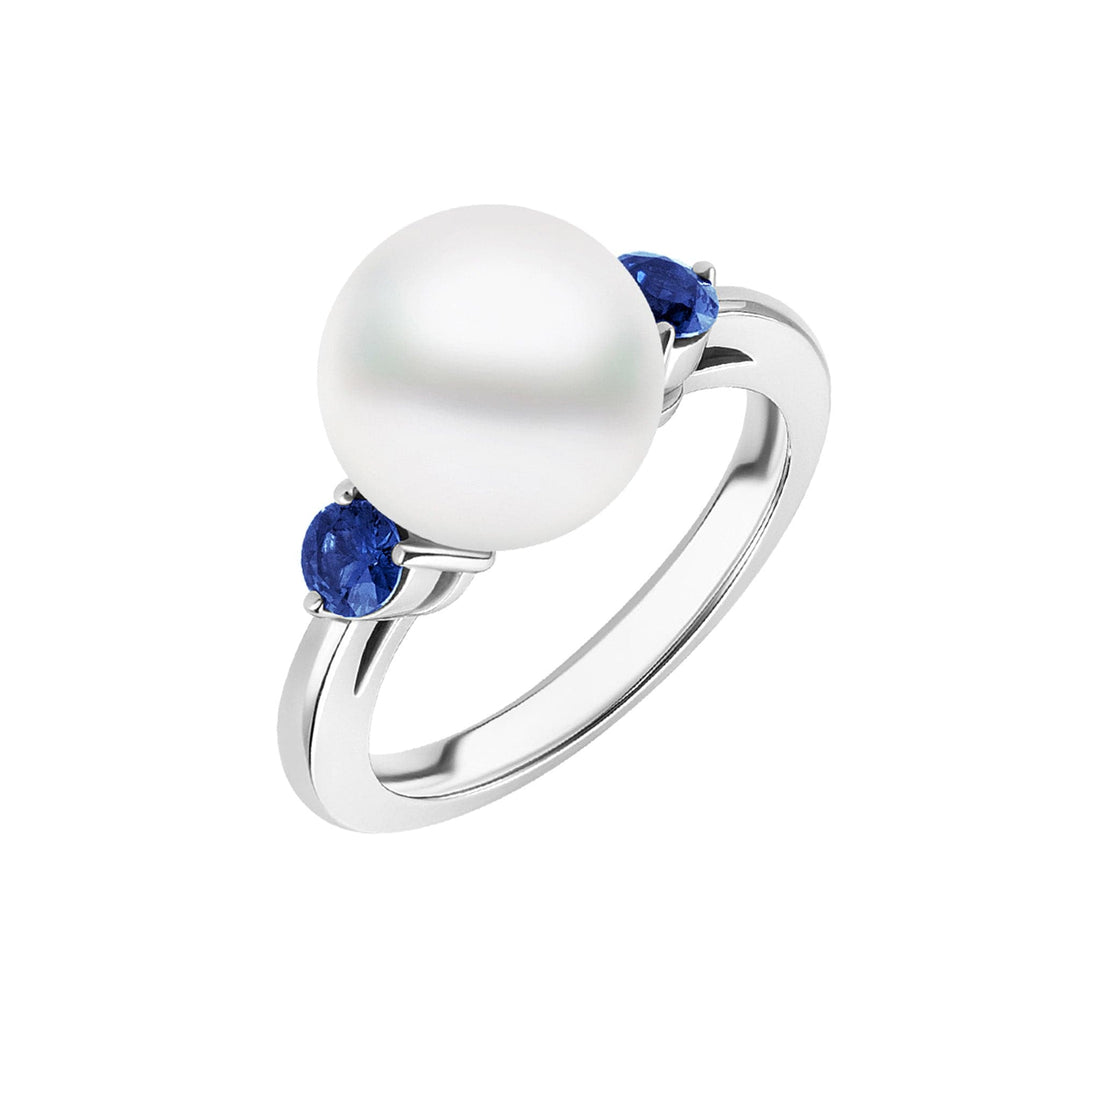 Mikimoto Pearl and Sapphire Ring in 18k White Gold  